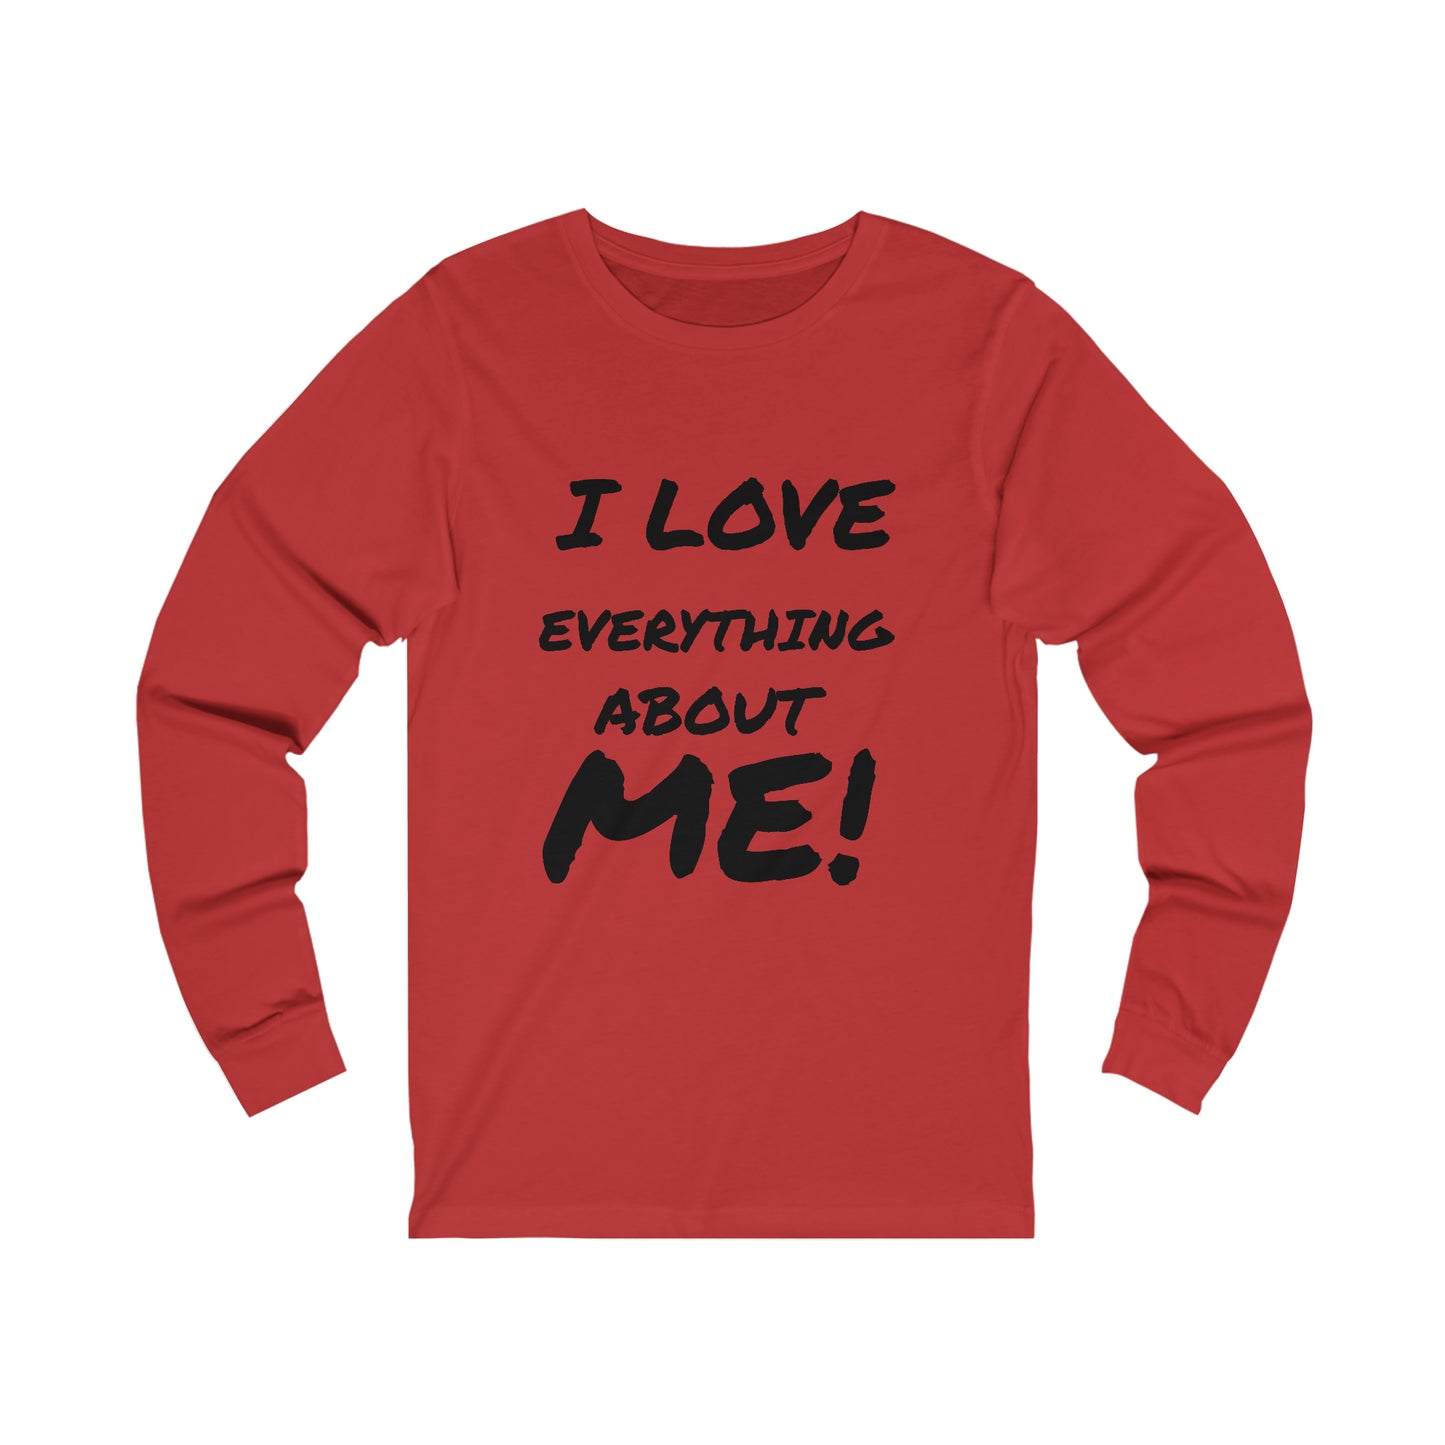 I LOVE EVERYTHING ABOUT ME! Unisex Jersey Long Sleeve Tee